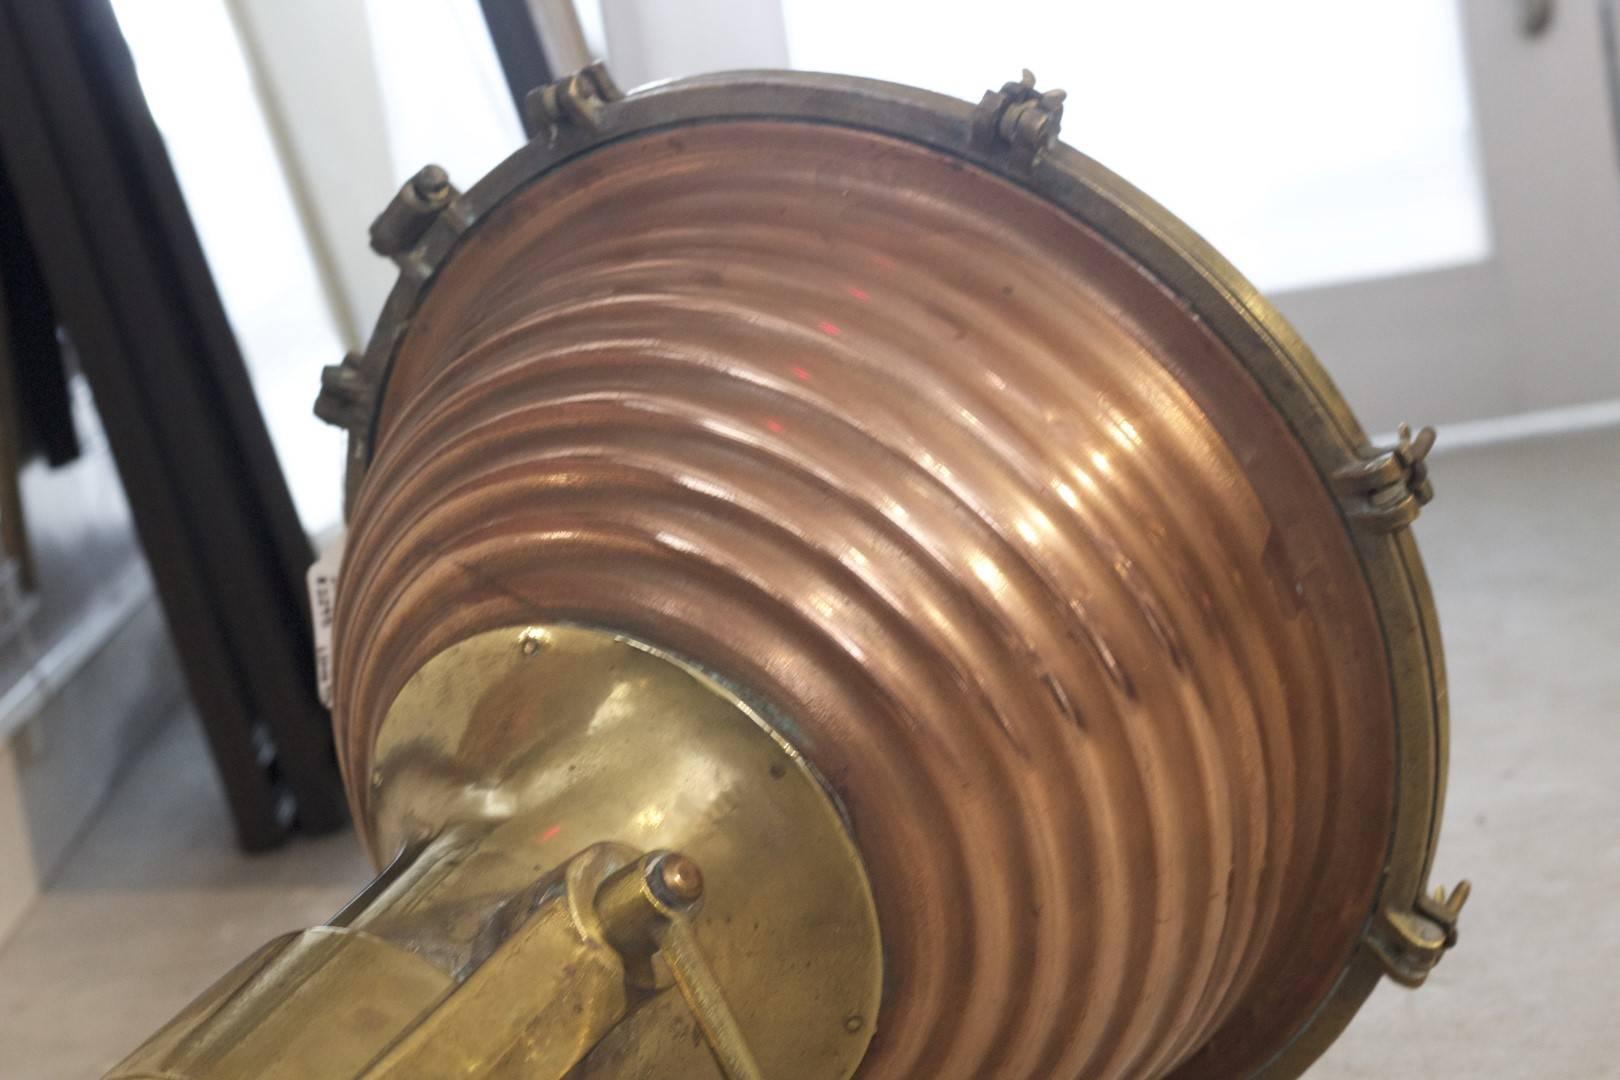 Rippled copper cargo light with hanging bracket. Dimensions: 22